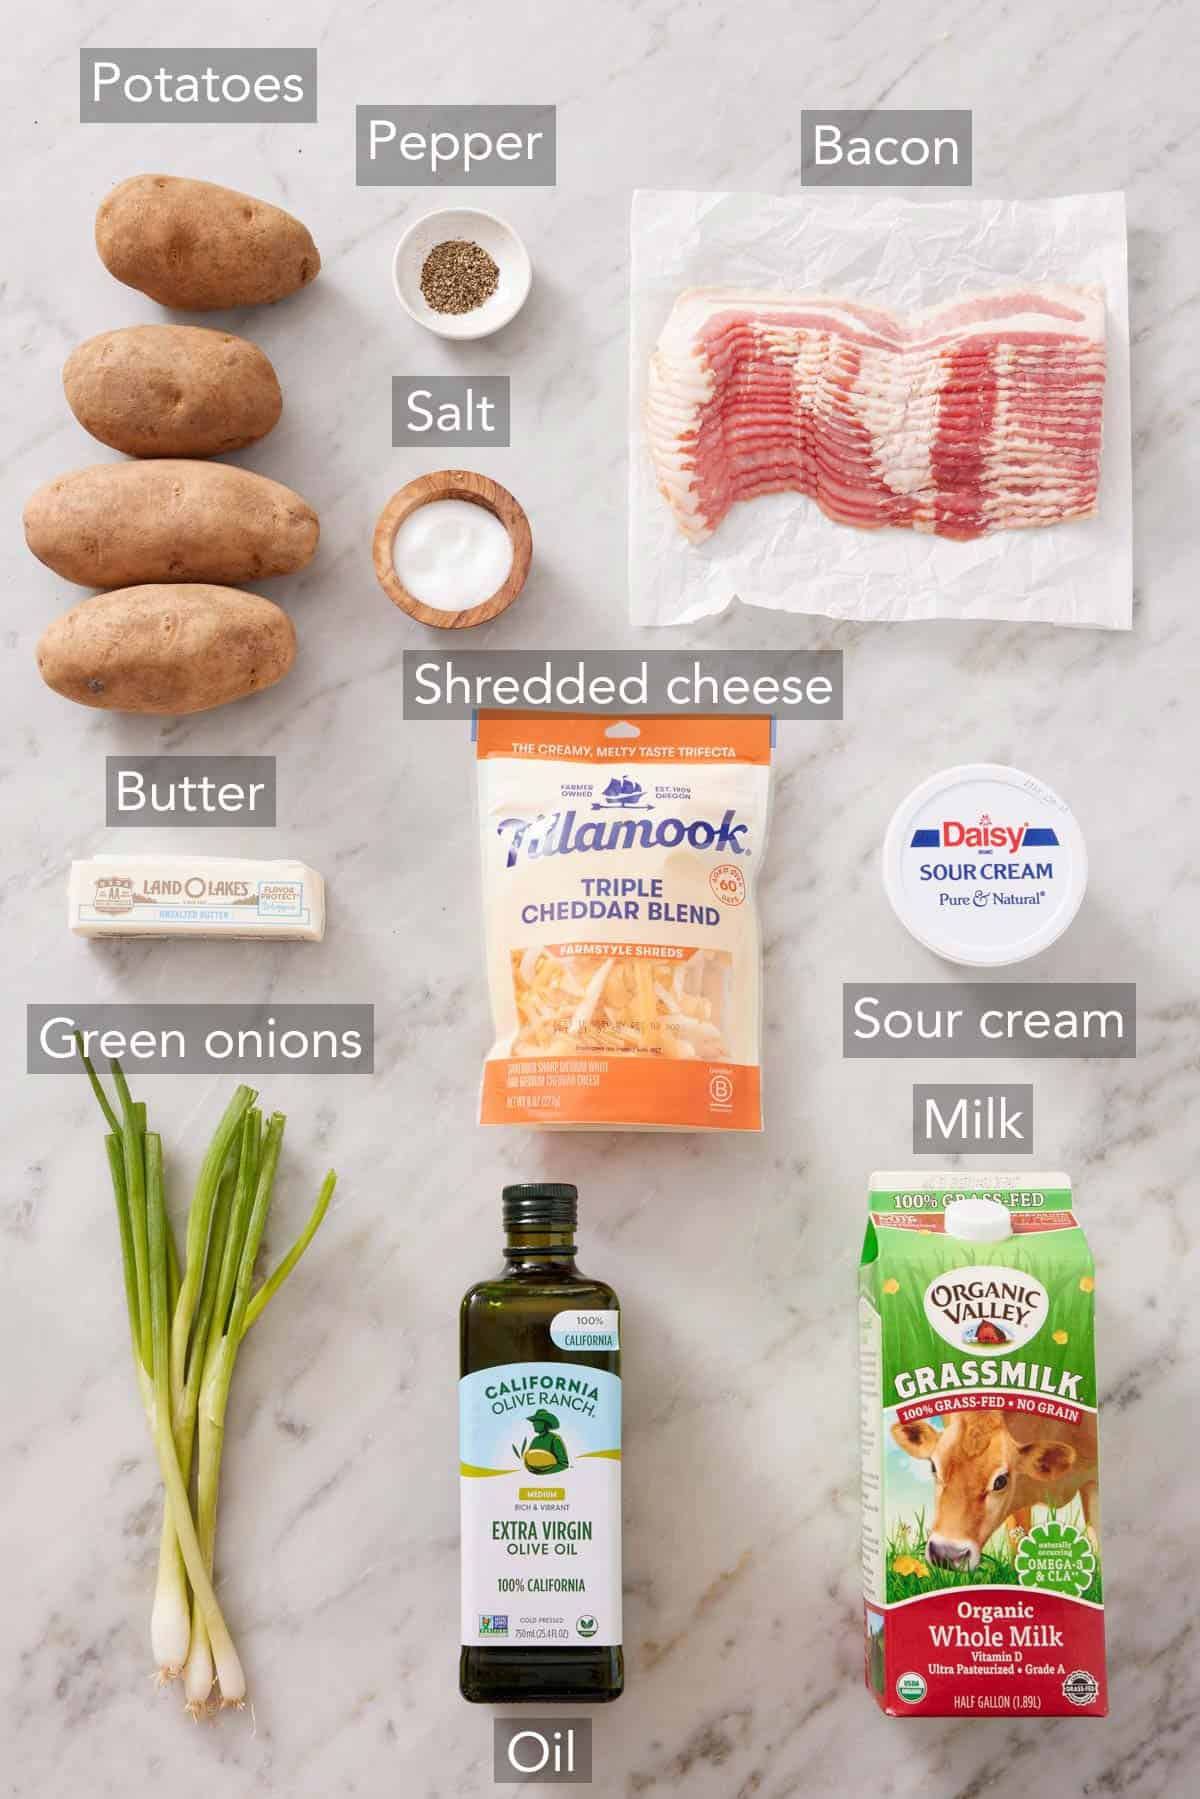 Ingredients needed to make twice-baked potatoes.